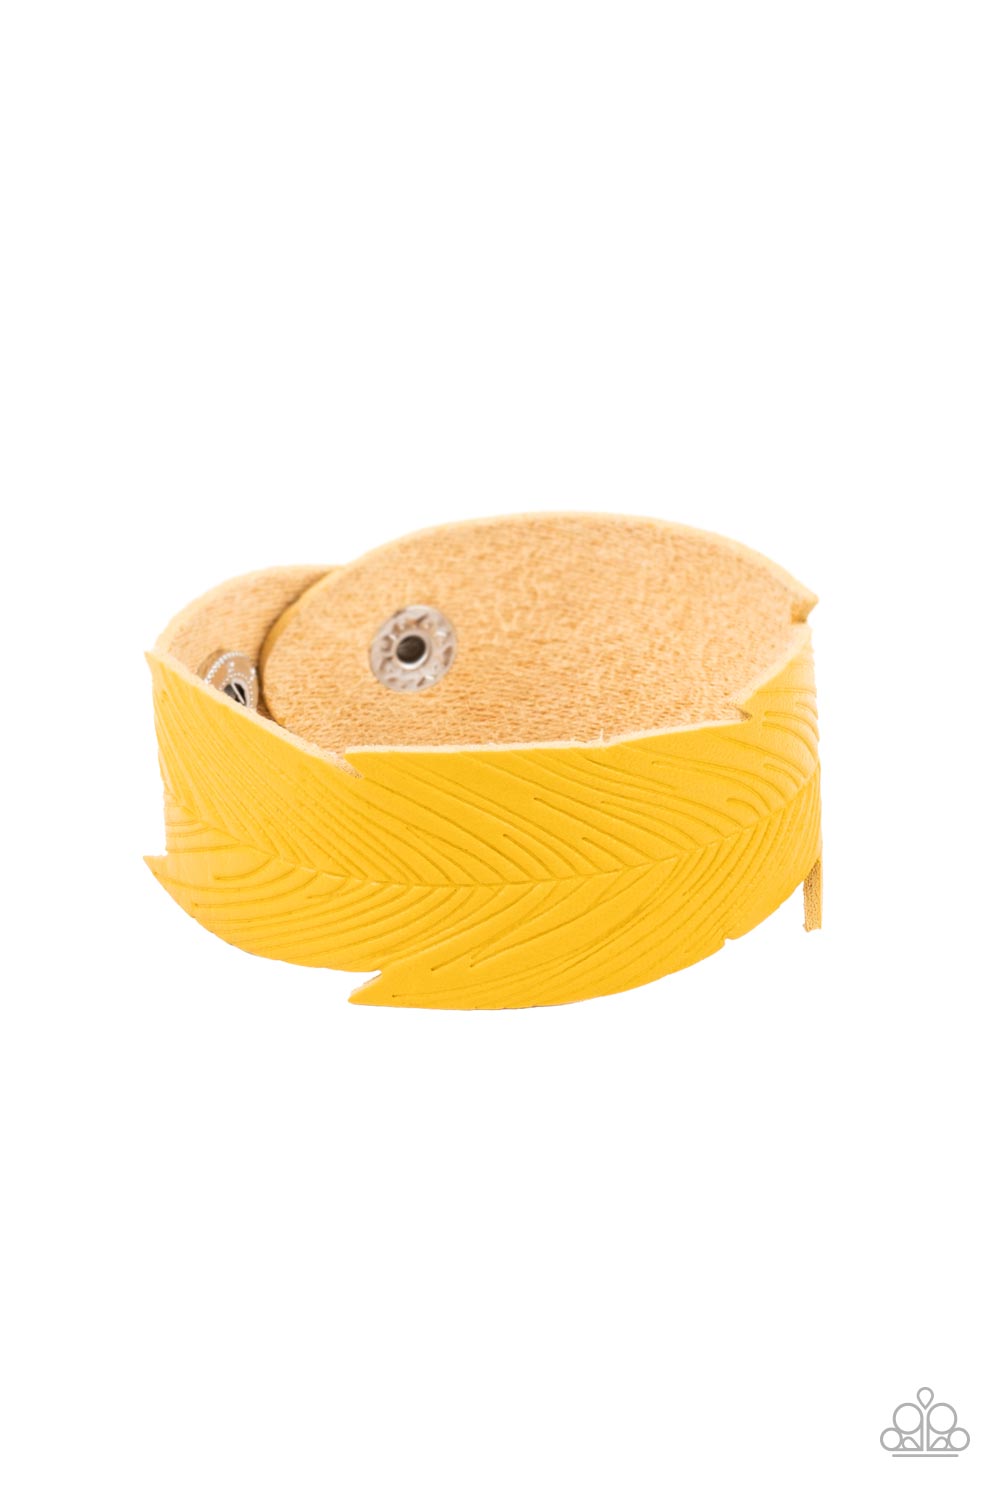 Paparazzi Accessories - Whimsically Winging It - Yellow Bracelet